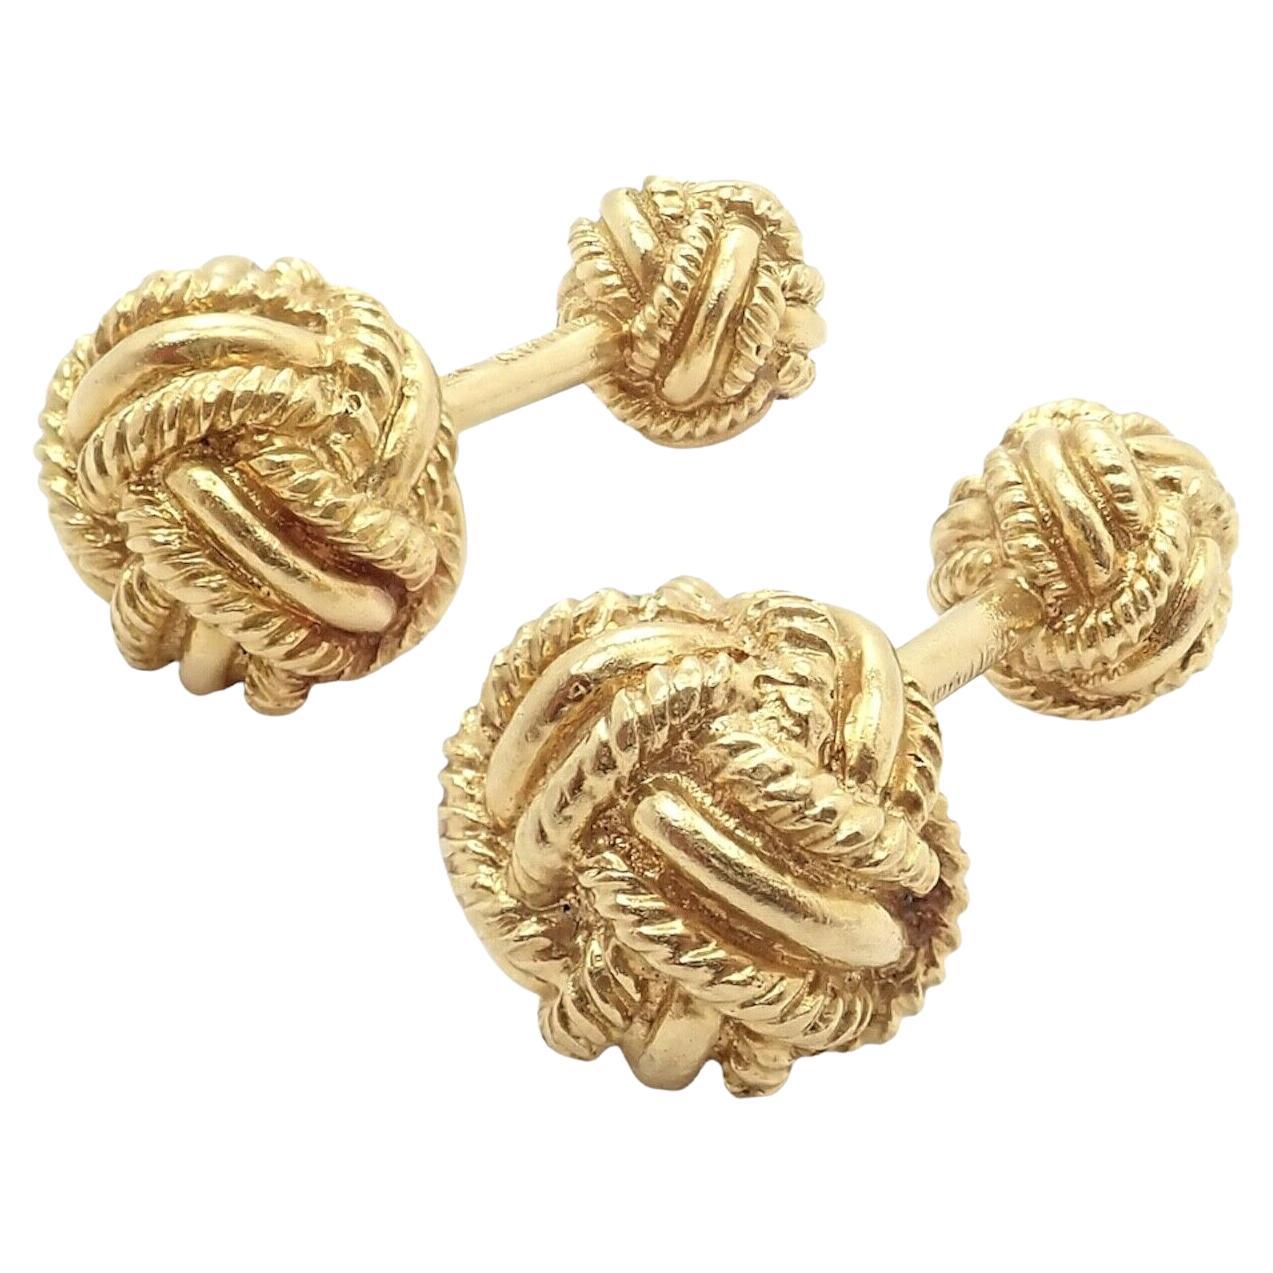 Vintage Tiffany & Co Jean Schlumberger Rope Knot Yellow Gold Cufflinks